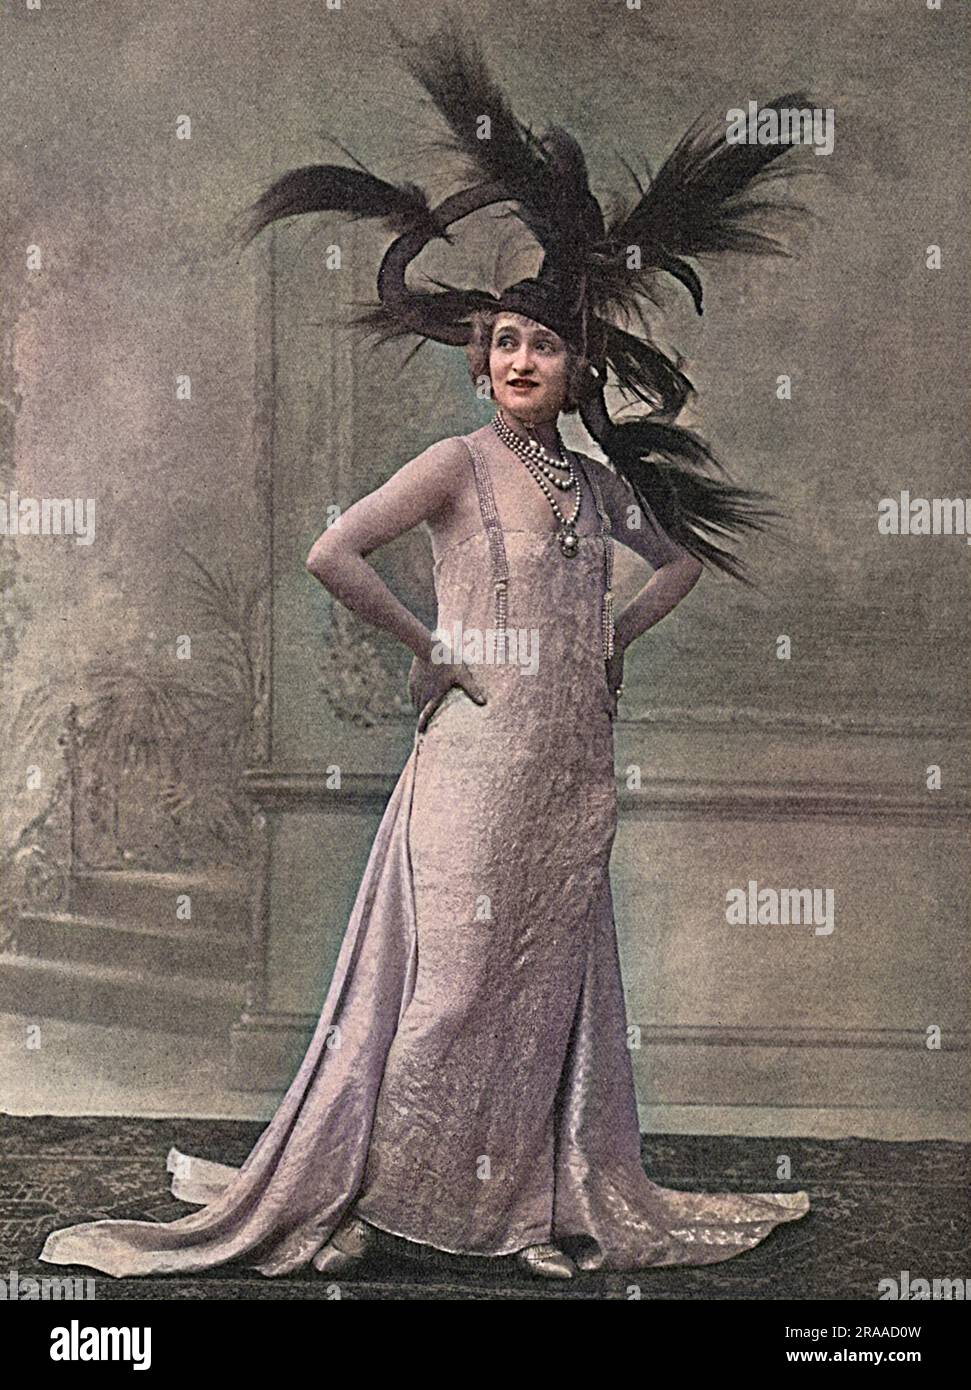 Gaby Deslys (1884 - 1920), French actress, music hall artiste and sometime lover of King Manuel II of Portugal, pictured in 1915 when she was appearing in '5064 Gerrard.'  Known for her magnificent stage costumes, she is wearing a particularly flamboyant headdress.     Date: 1915 Stock Photo